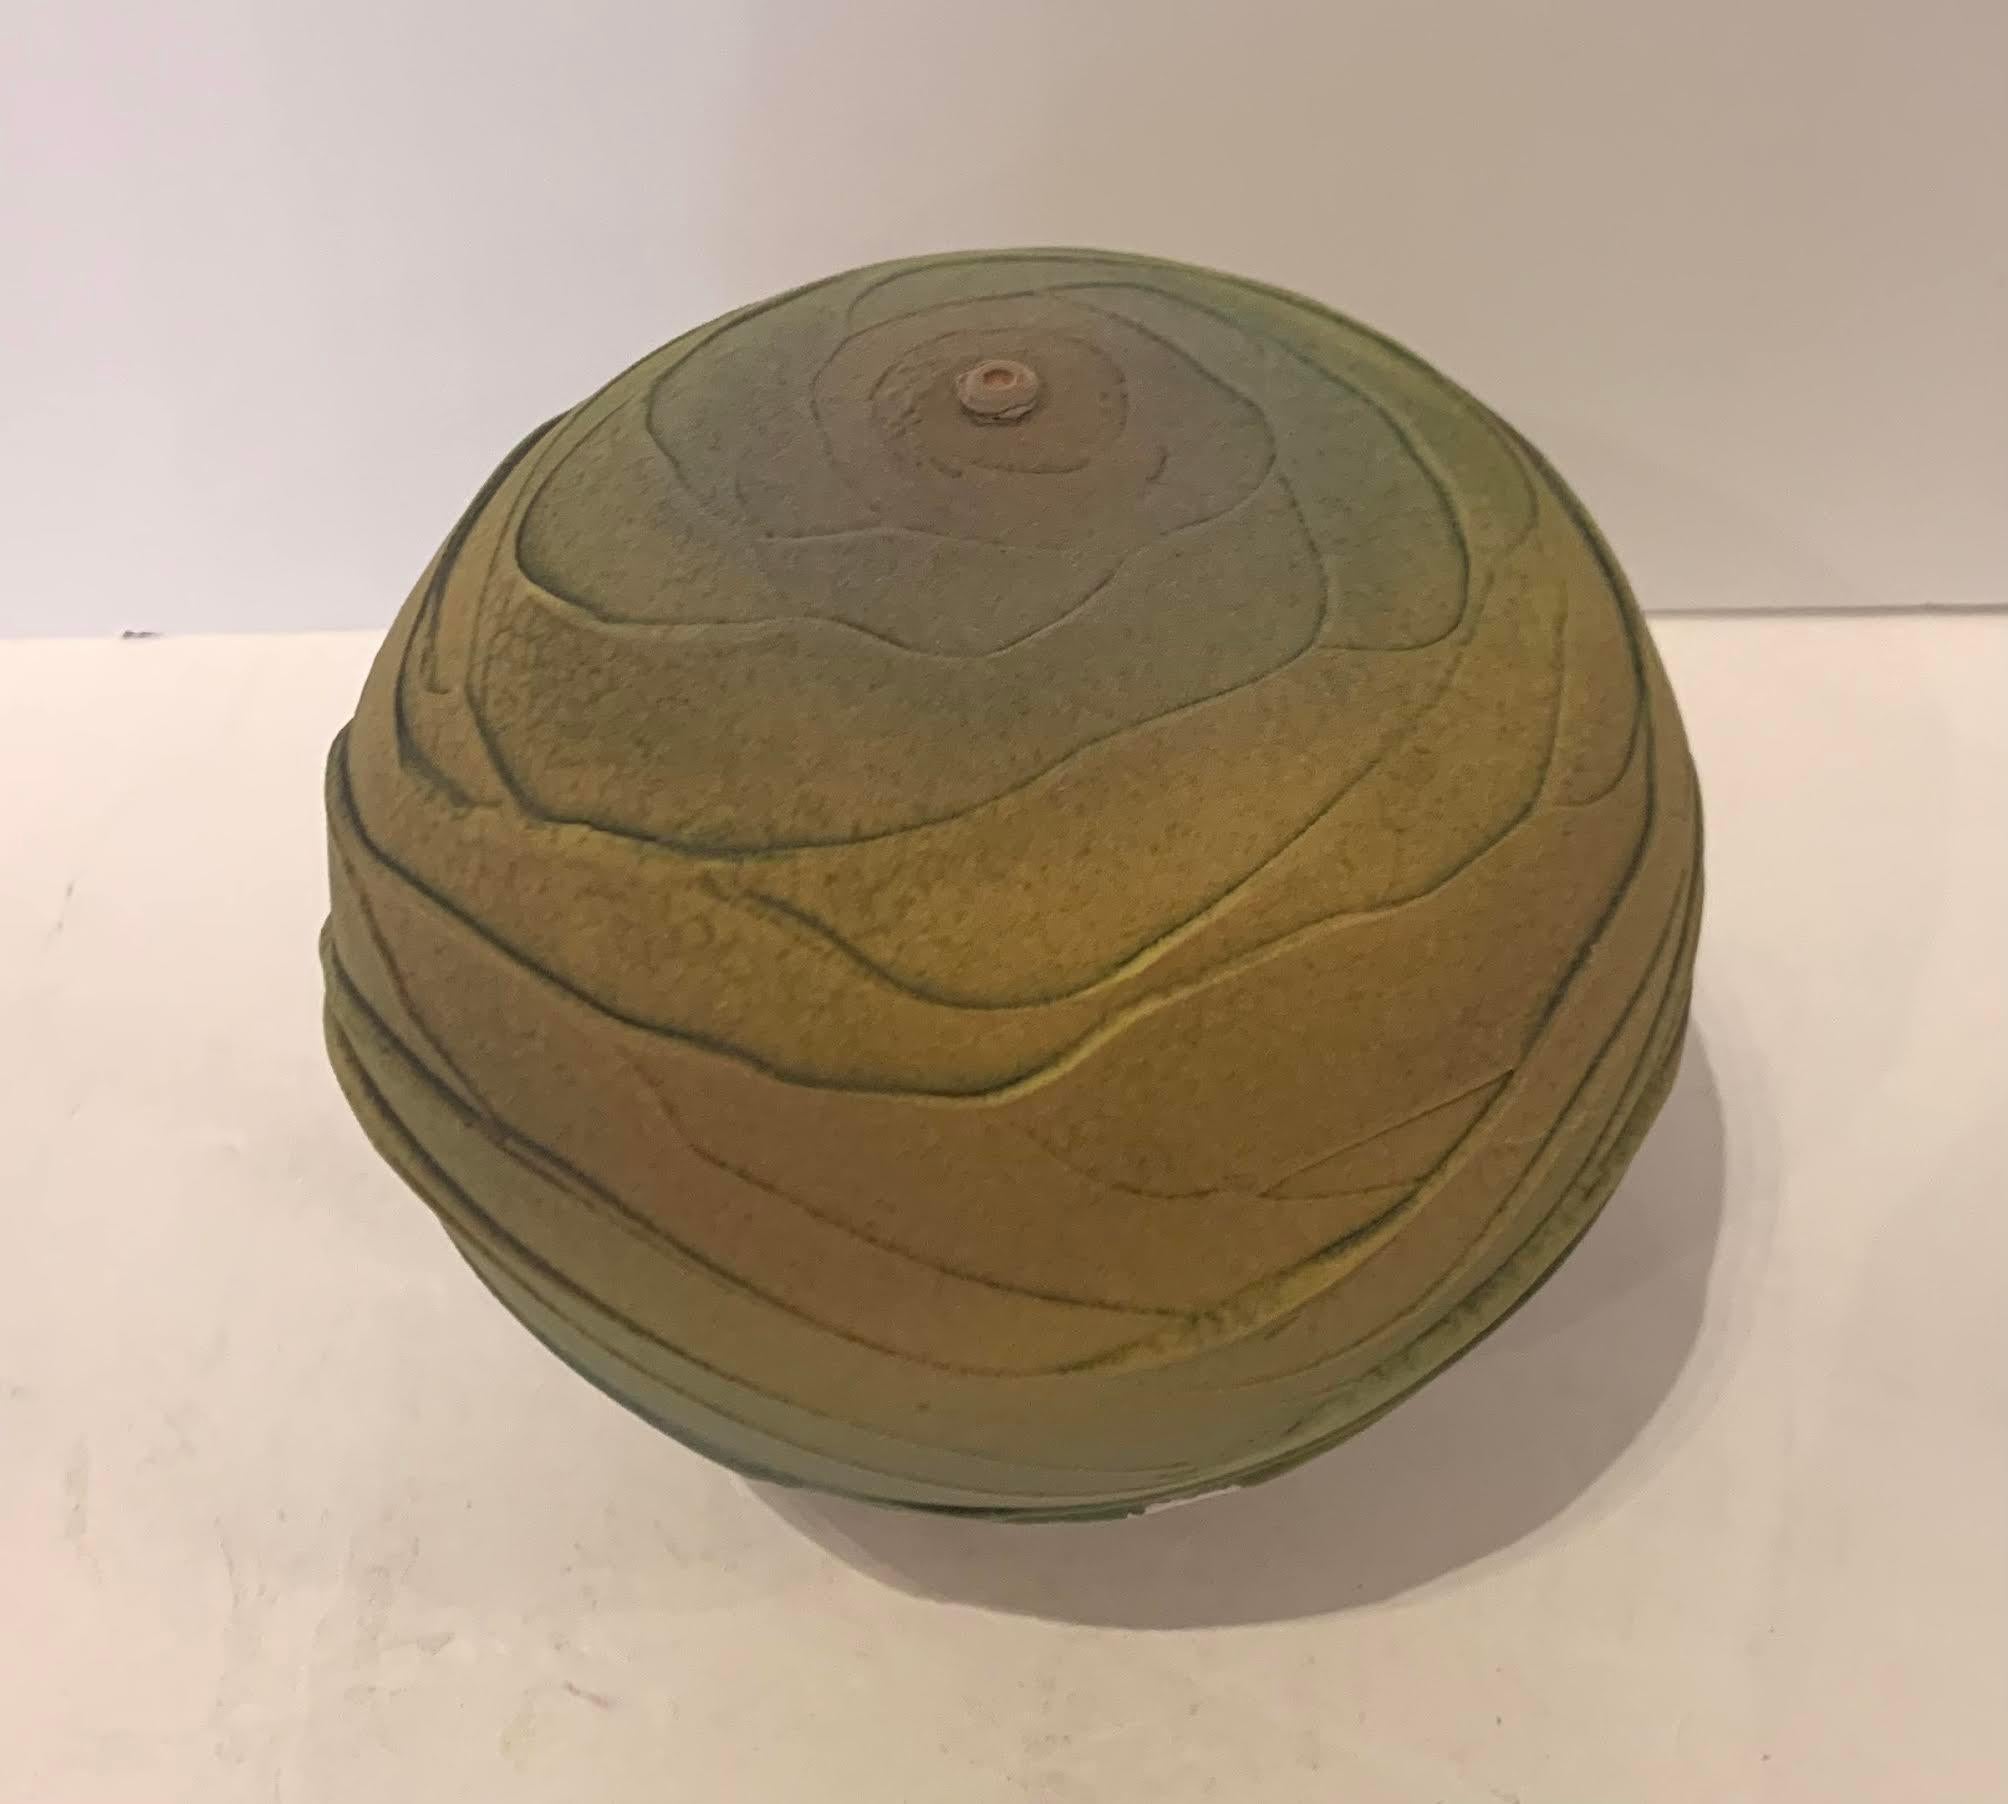 Contemporary textured round ceramic earthenware vase.
Classical shape textural design vase inspired by the landscape. 
Muted shades of green and yellow.
The vase design has an ancient feel.
Hand made one of a kind.
Part of a collection of